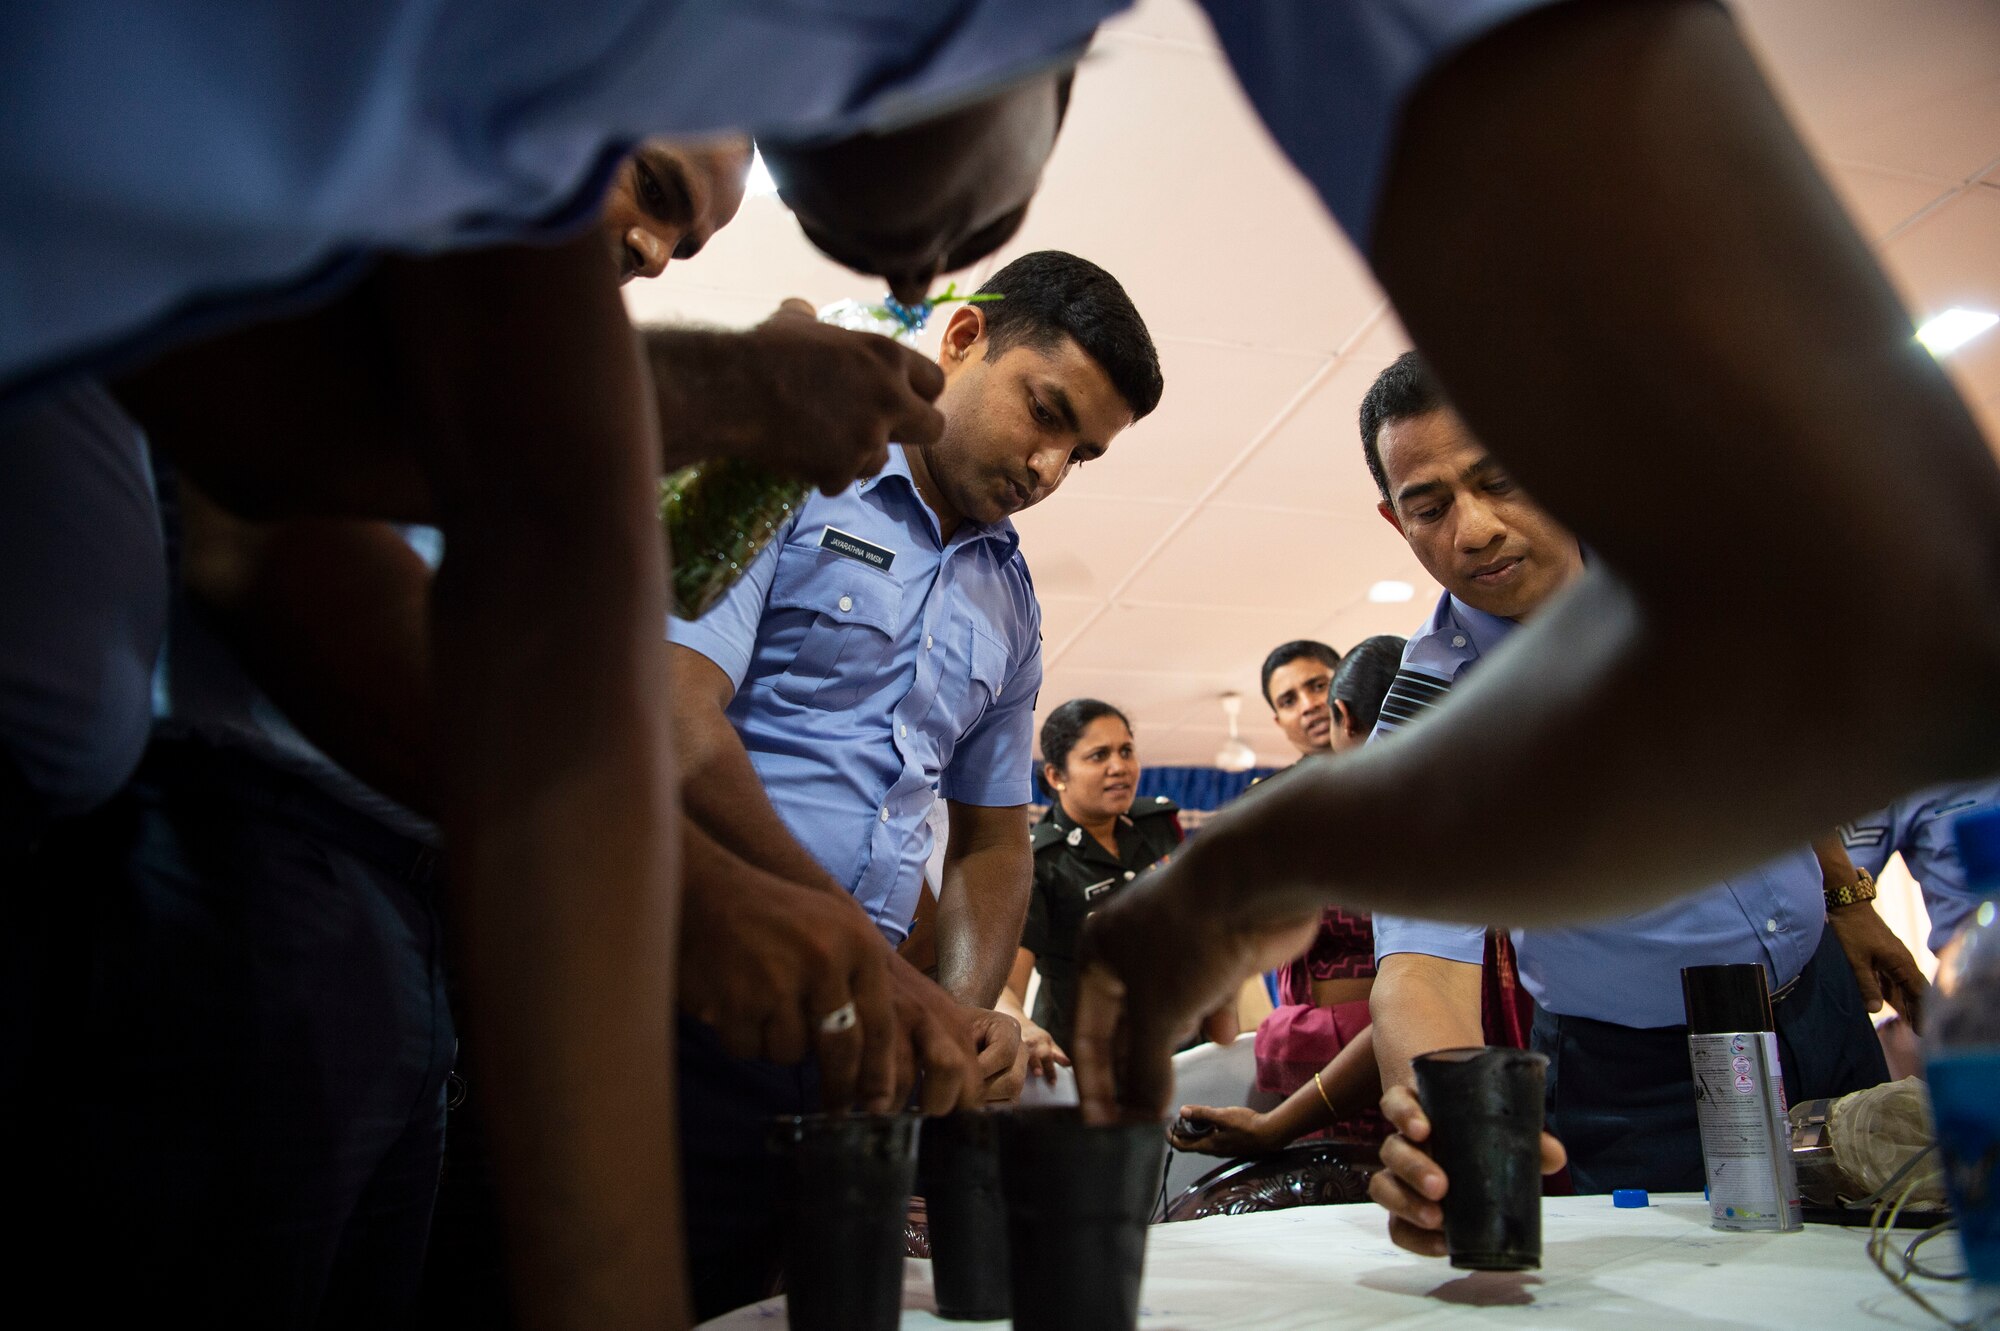 Sri Lankan civilian public health officials, entomologists, military doctors, and military public health officials build mosquito and tick traps during an exchange for Pacific Angel 18-4, in Anuradhapura, Sri Lanka, Aug. 9, 2018. Through PAC ANGEL 18, the U.S. military strengthens its relationships with other nations’ through mutually beneficial activities to include humanitarian assistance and civil military operations, which promote regional cooperation and interoperability. (U.S. Air Force photo by Tech. Sgt. Heather Redman)